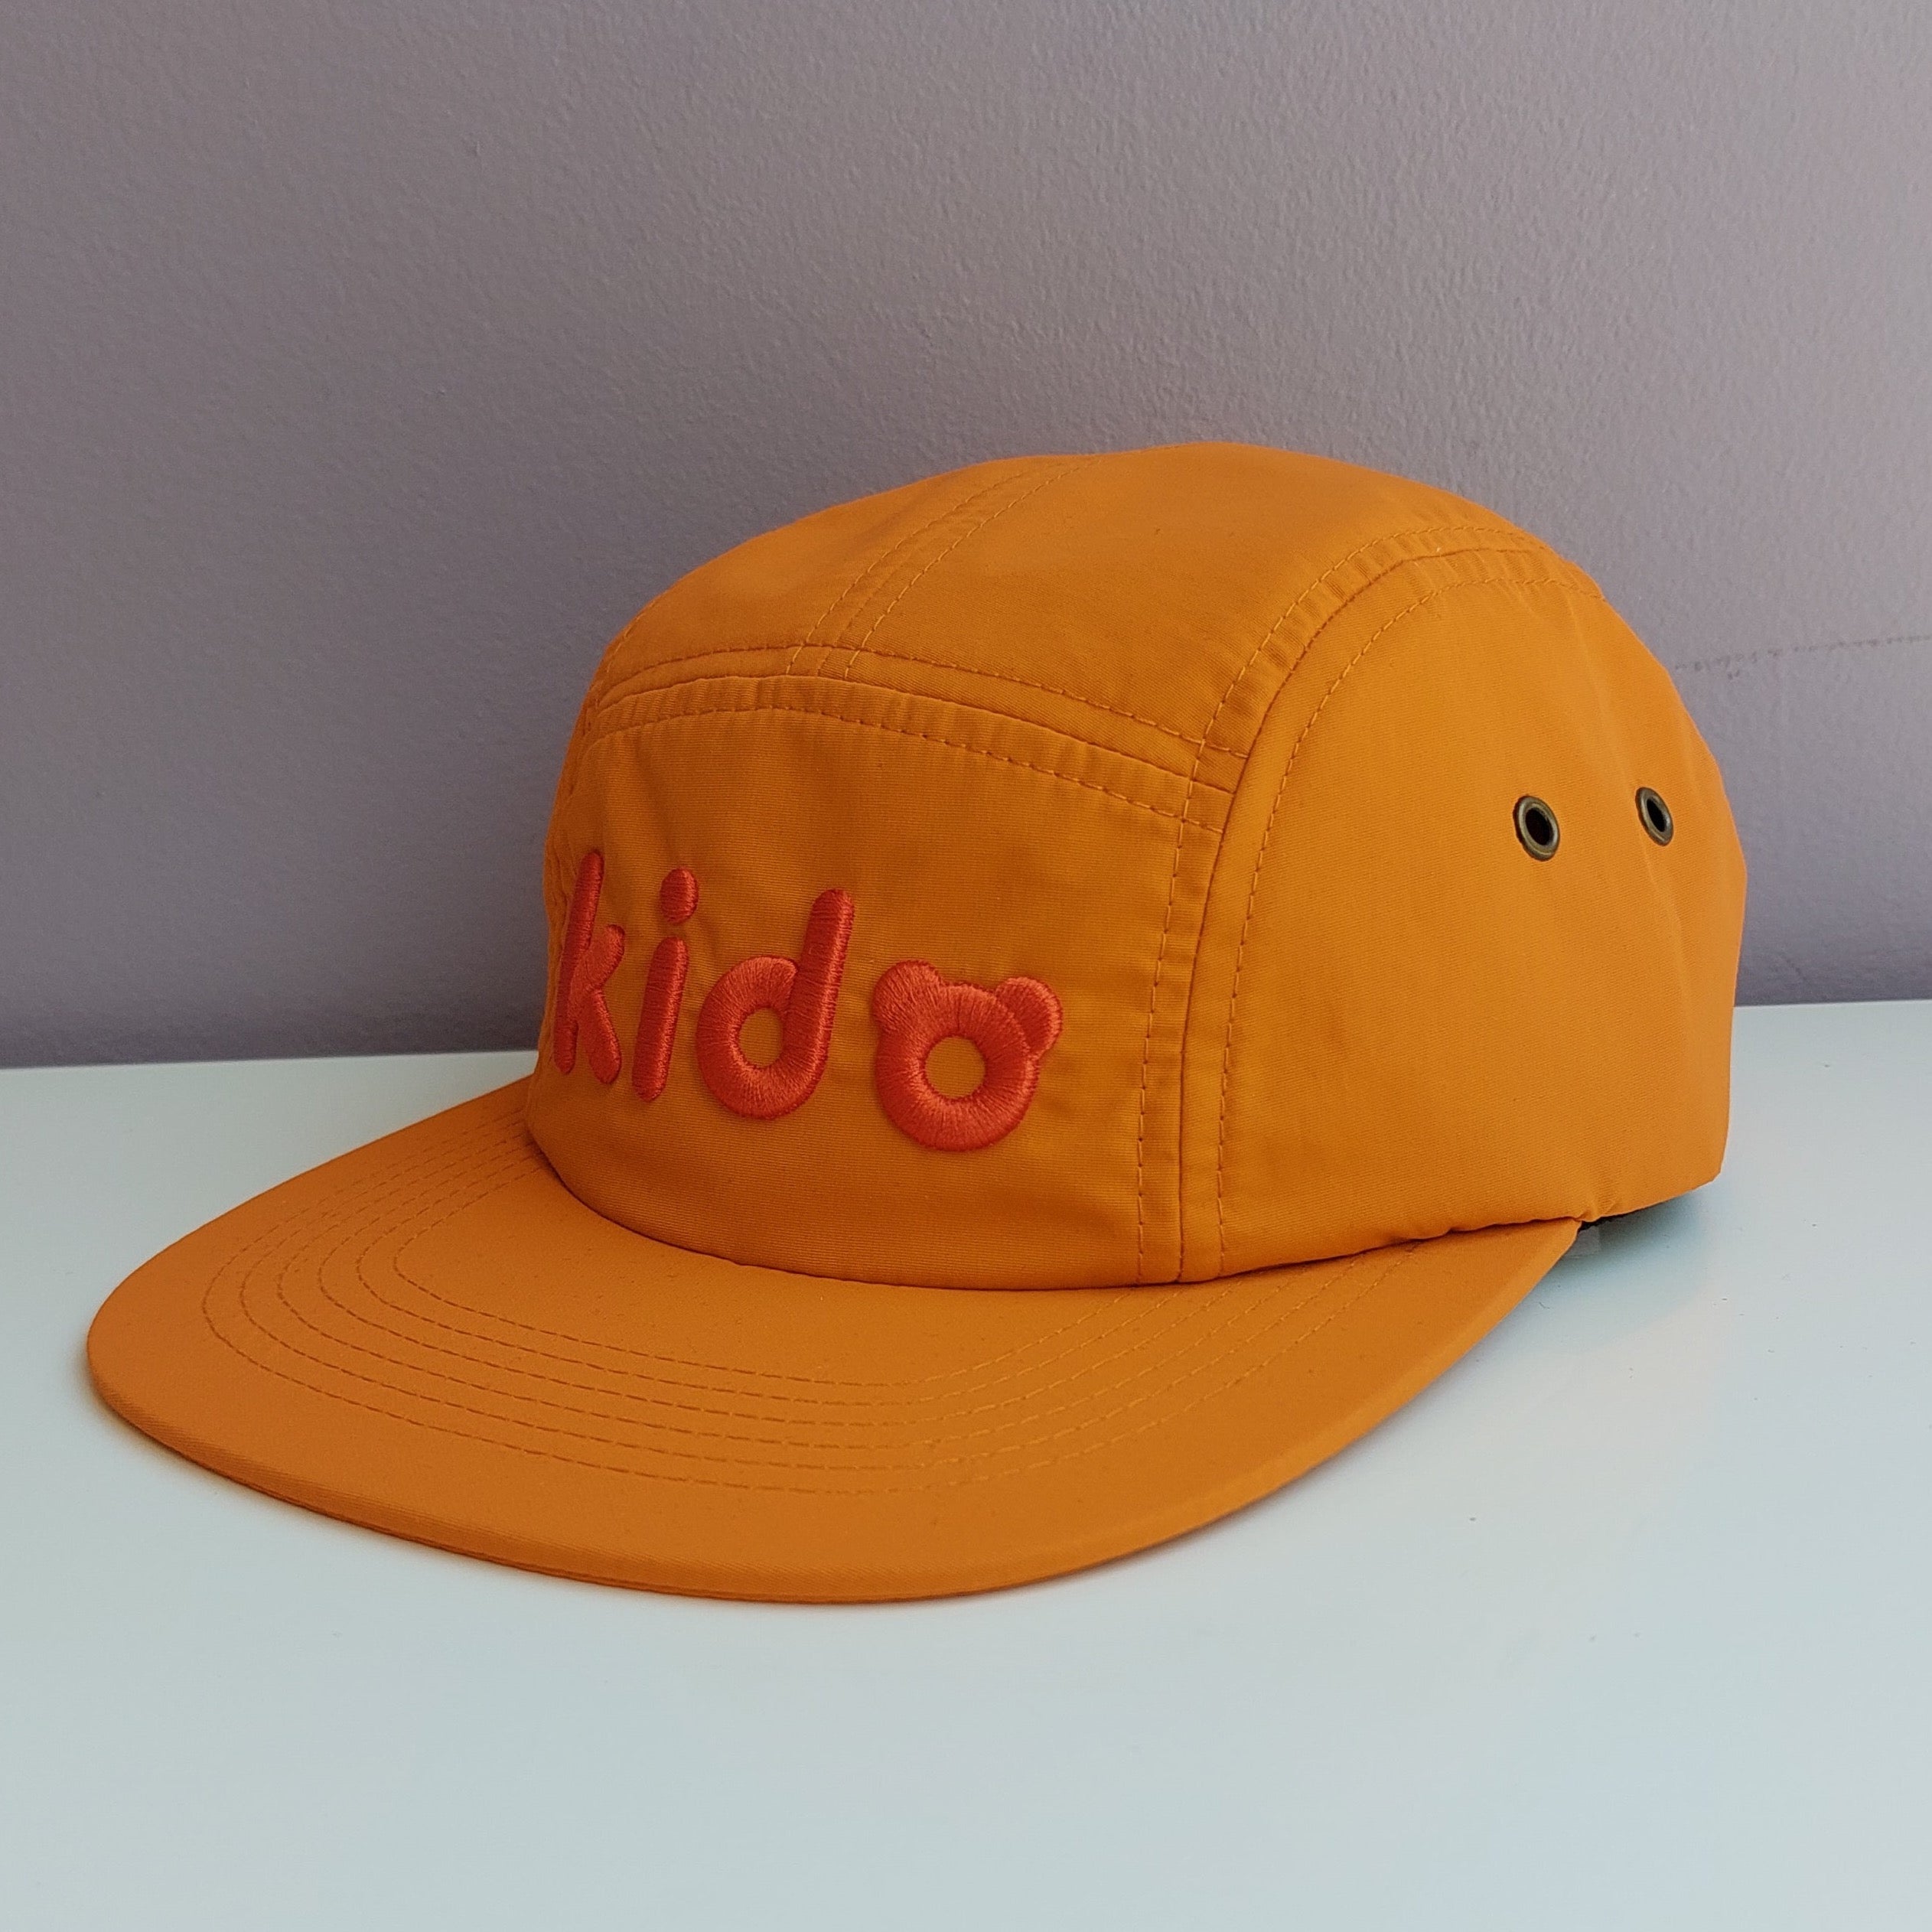 An orange 5 panel cap turned at a 45 degree angle sits on a white surface with a light purple background. The Kido logo is embroidered across the front in slightly darker orange thread.